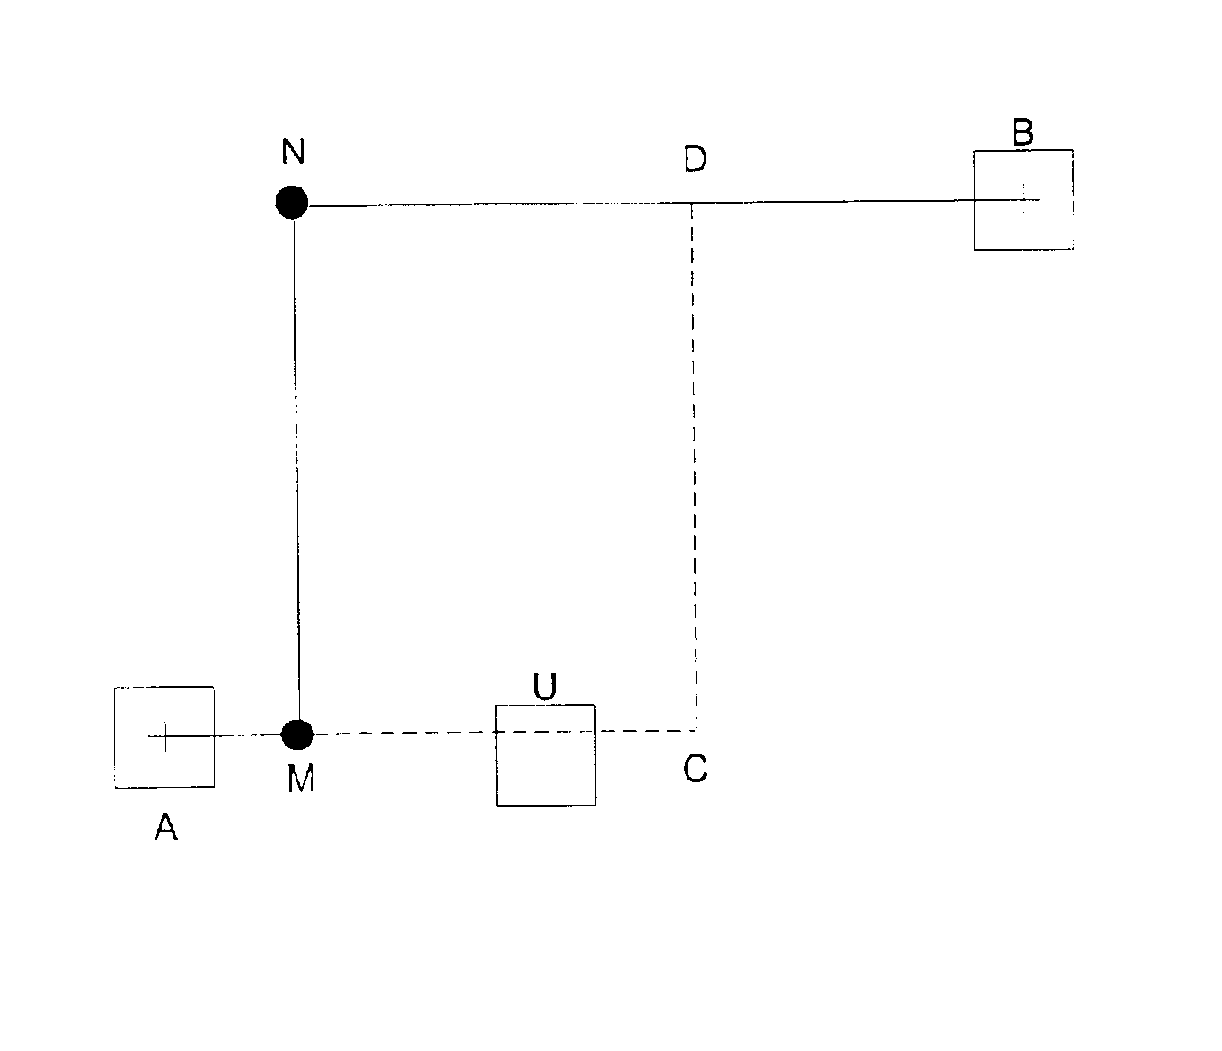 Method for routing connections in the display of a network topology